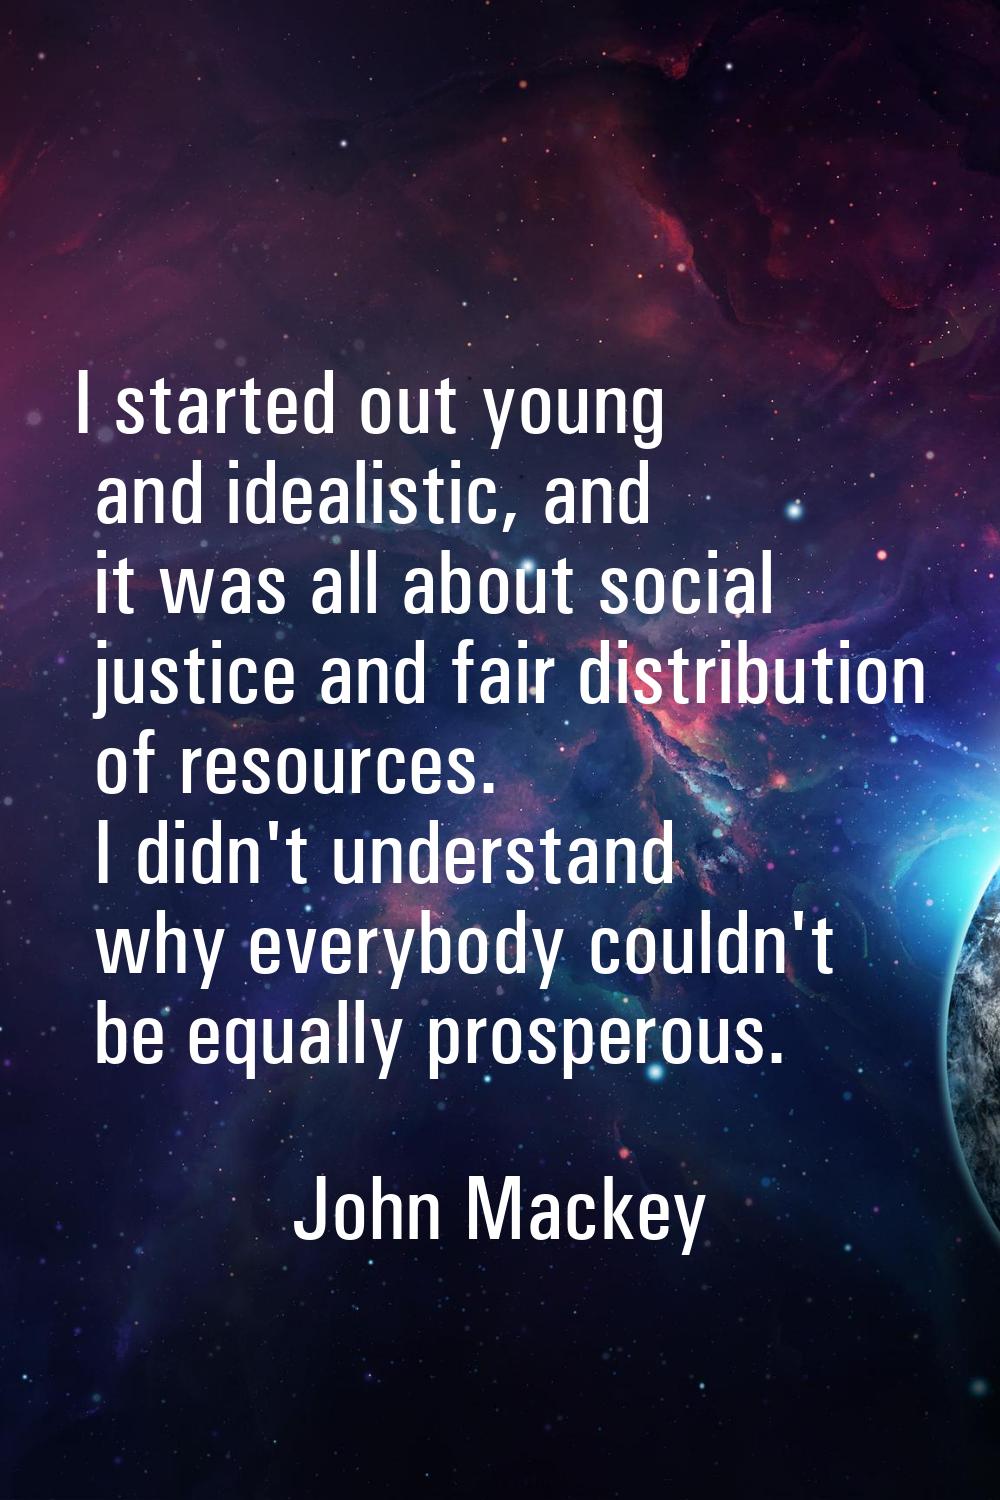 I started out young and idealistic, and it was all about social justice and fair distribution of re